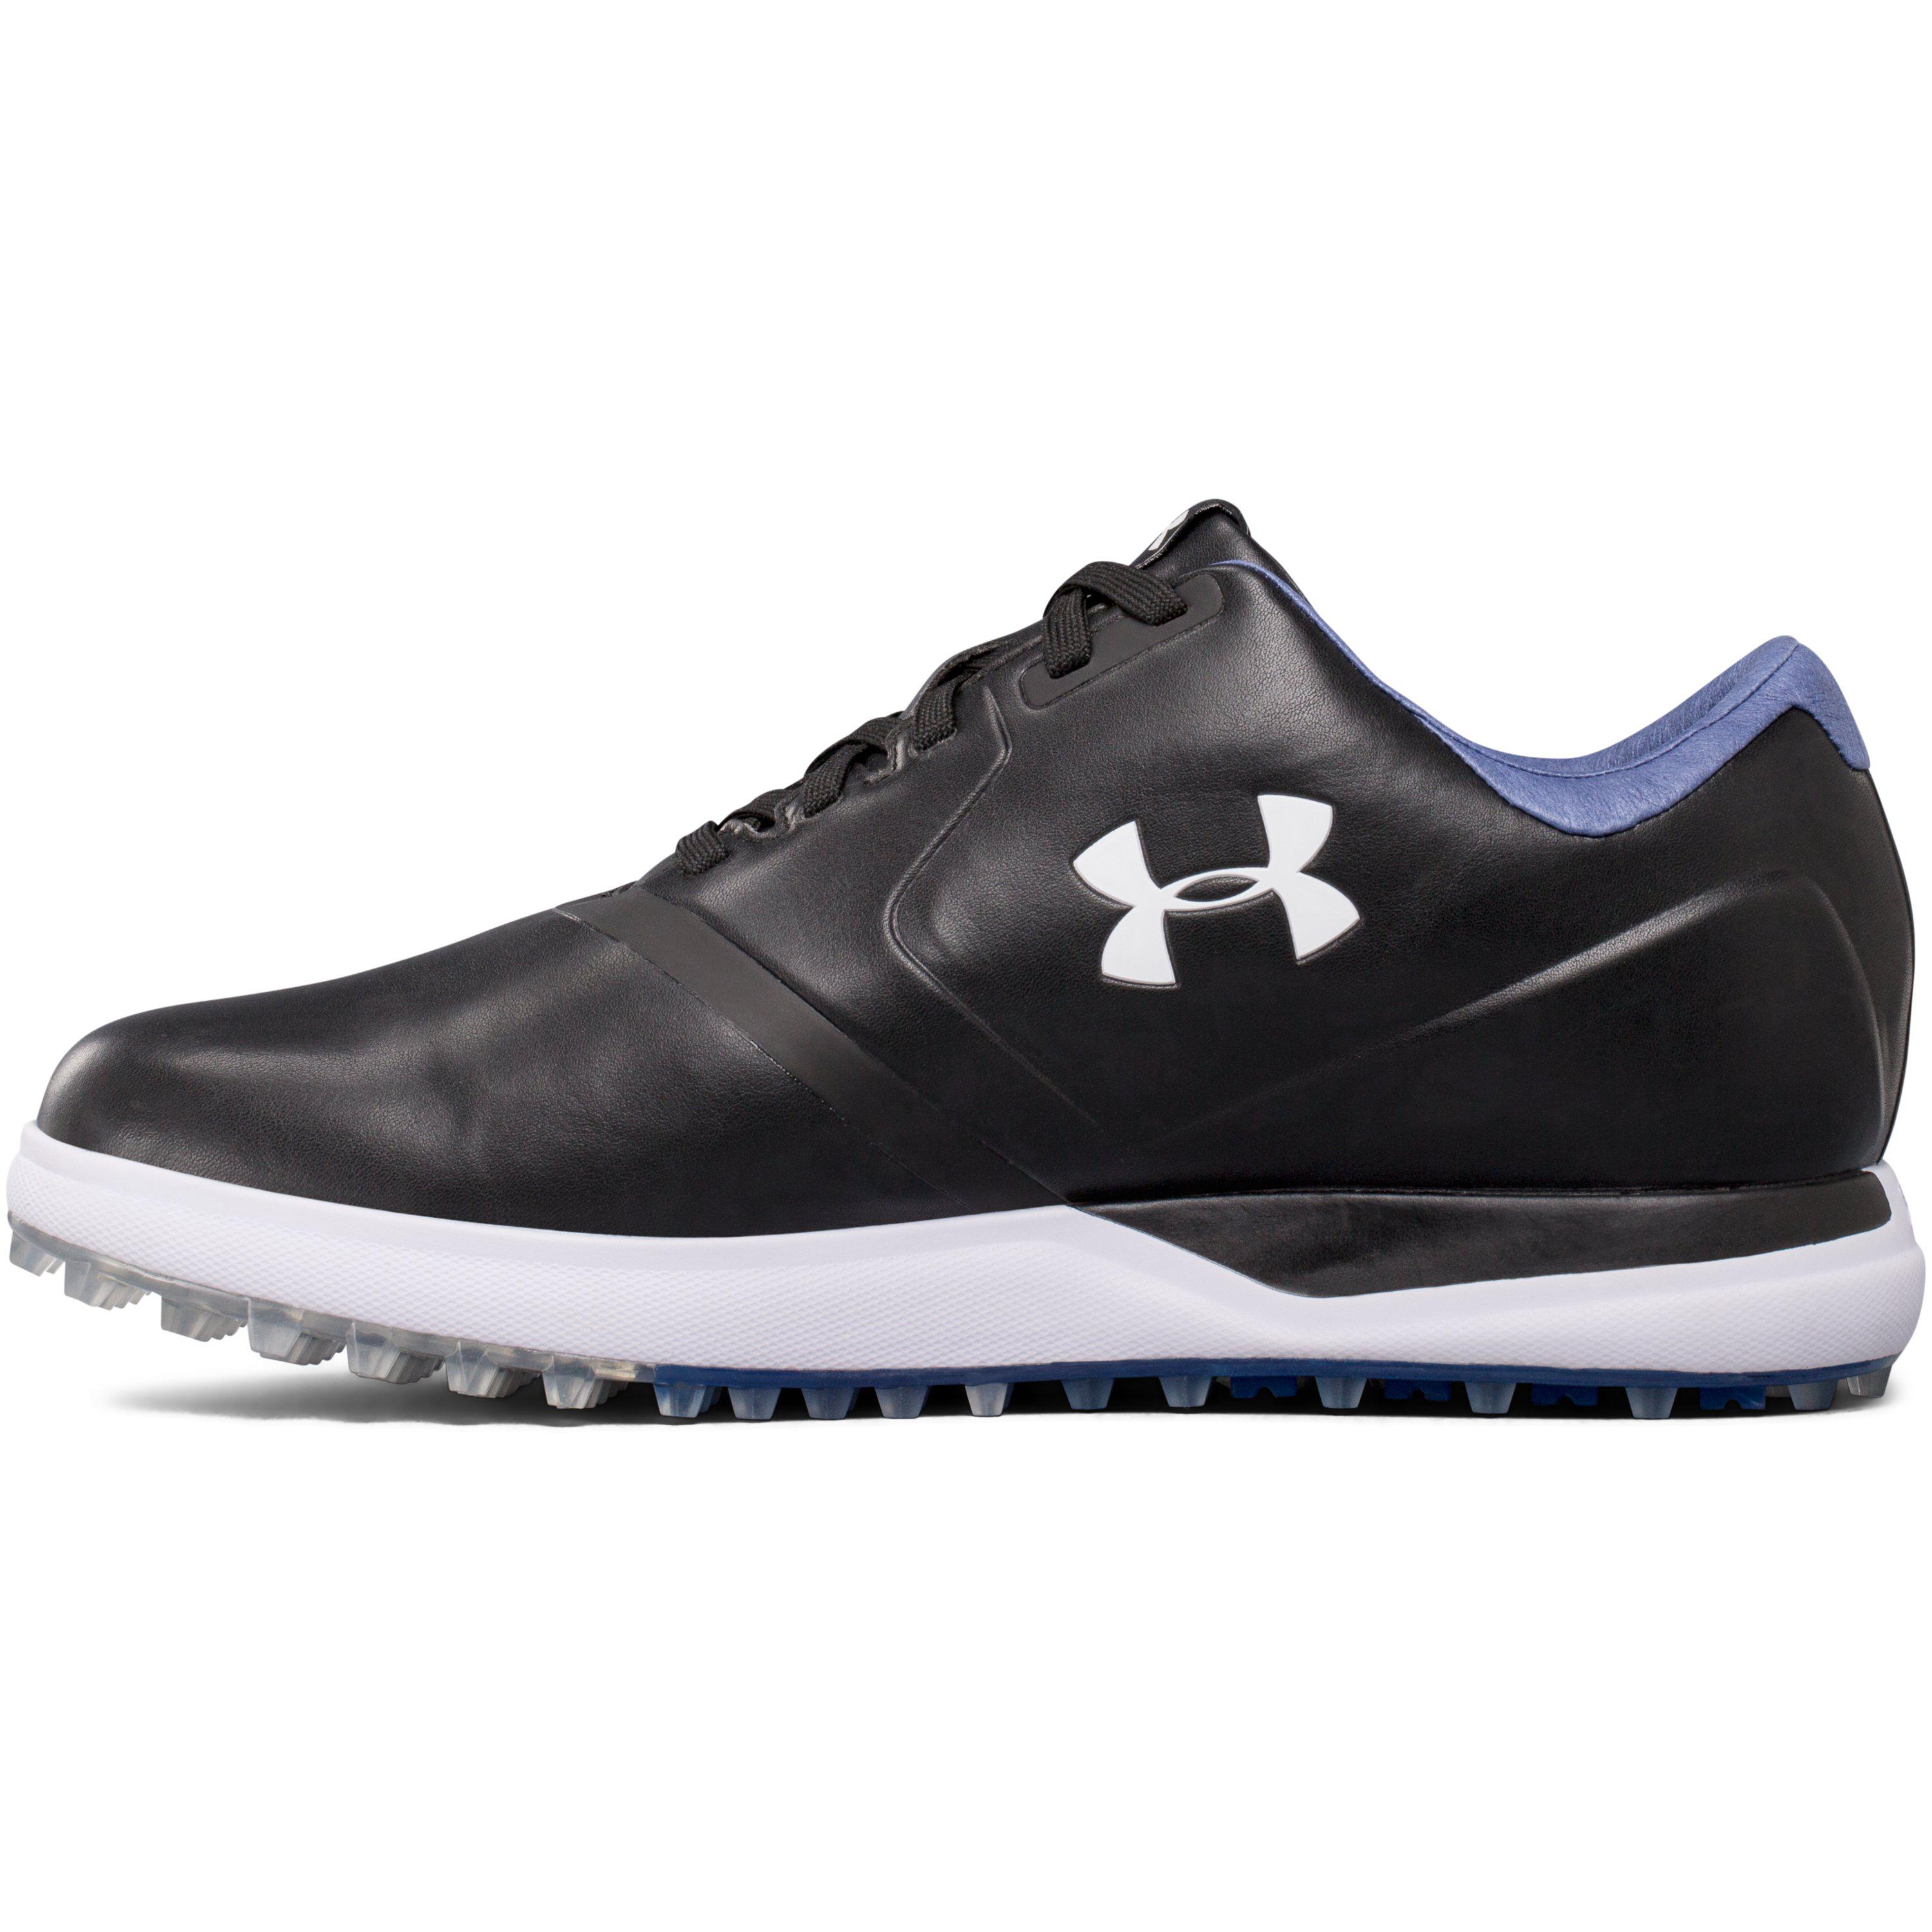 wide golf shoes on sale